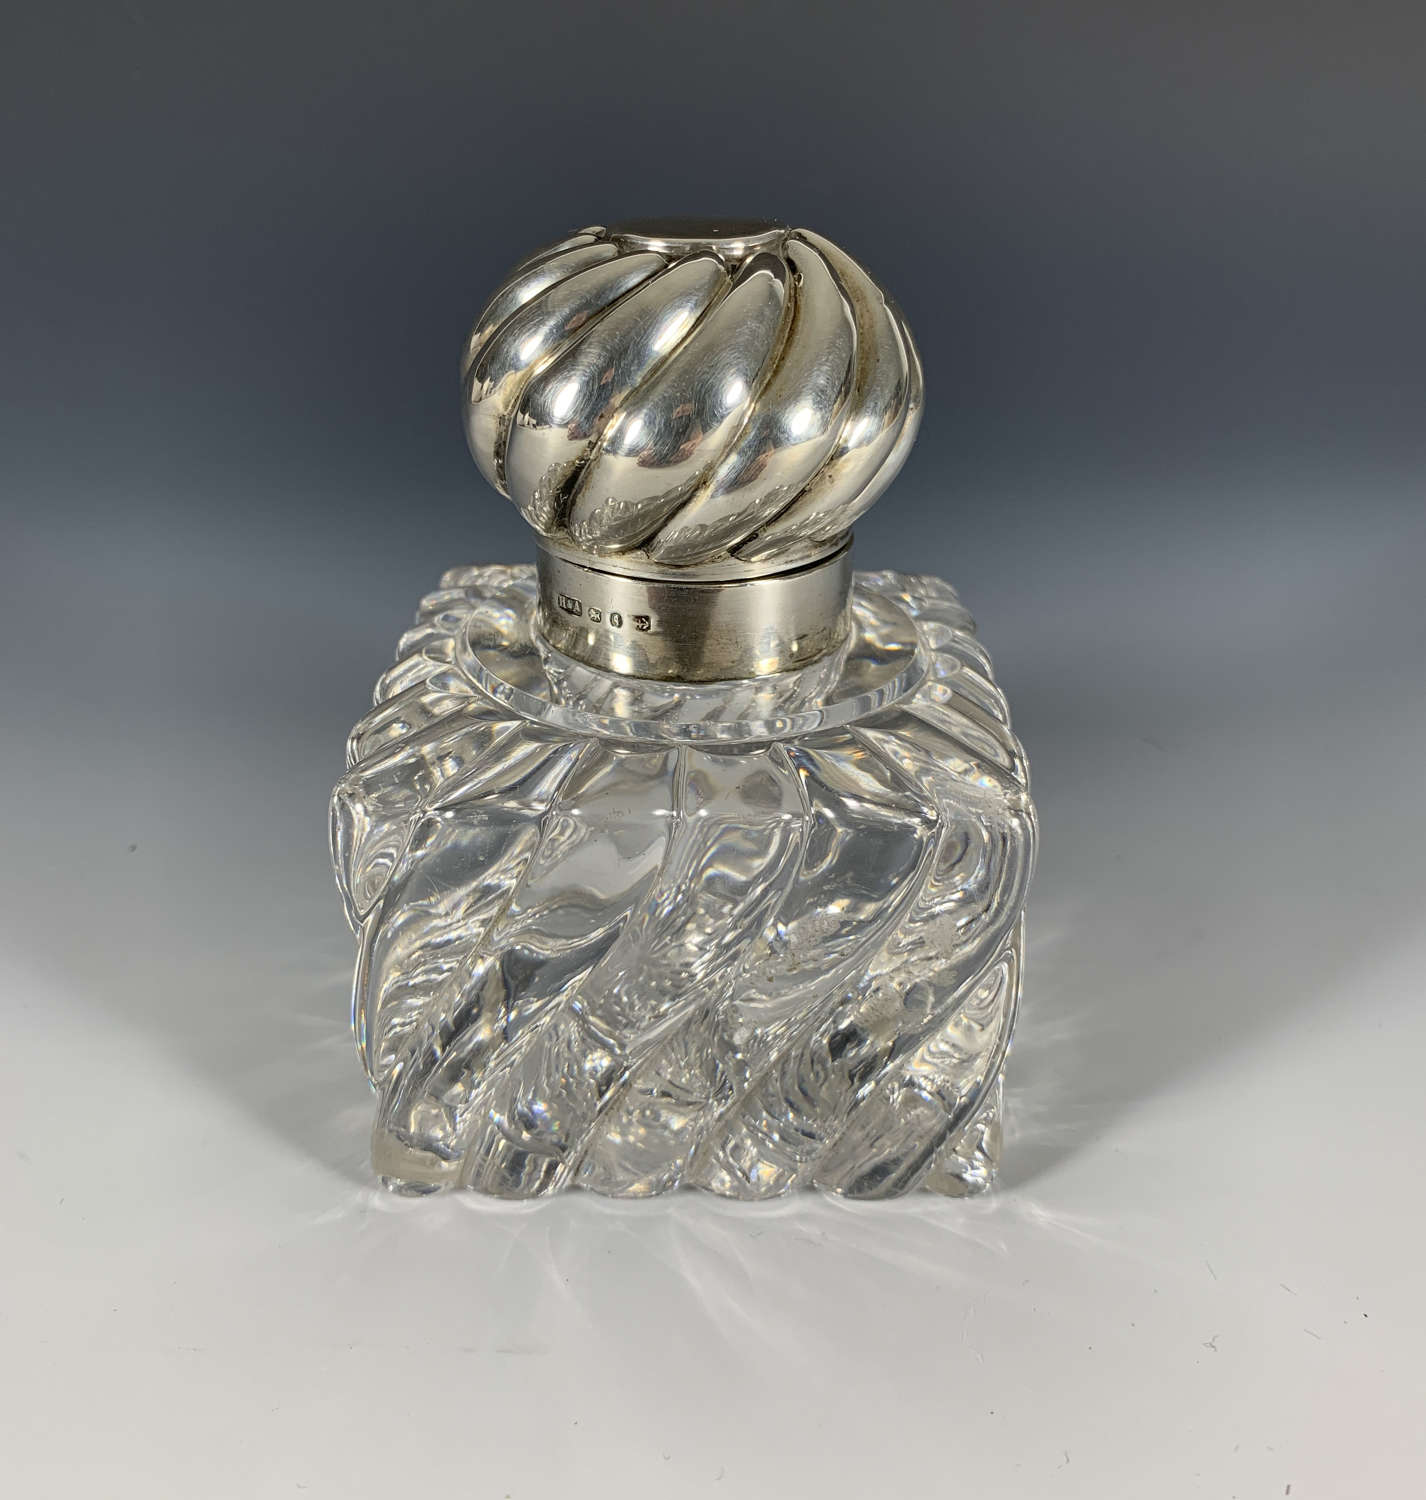 A Wrythen glass and silver inkwell